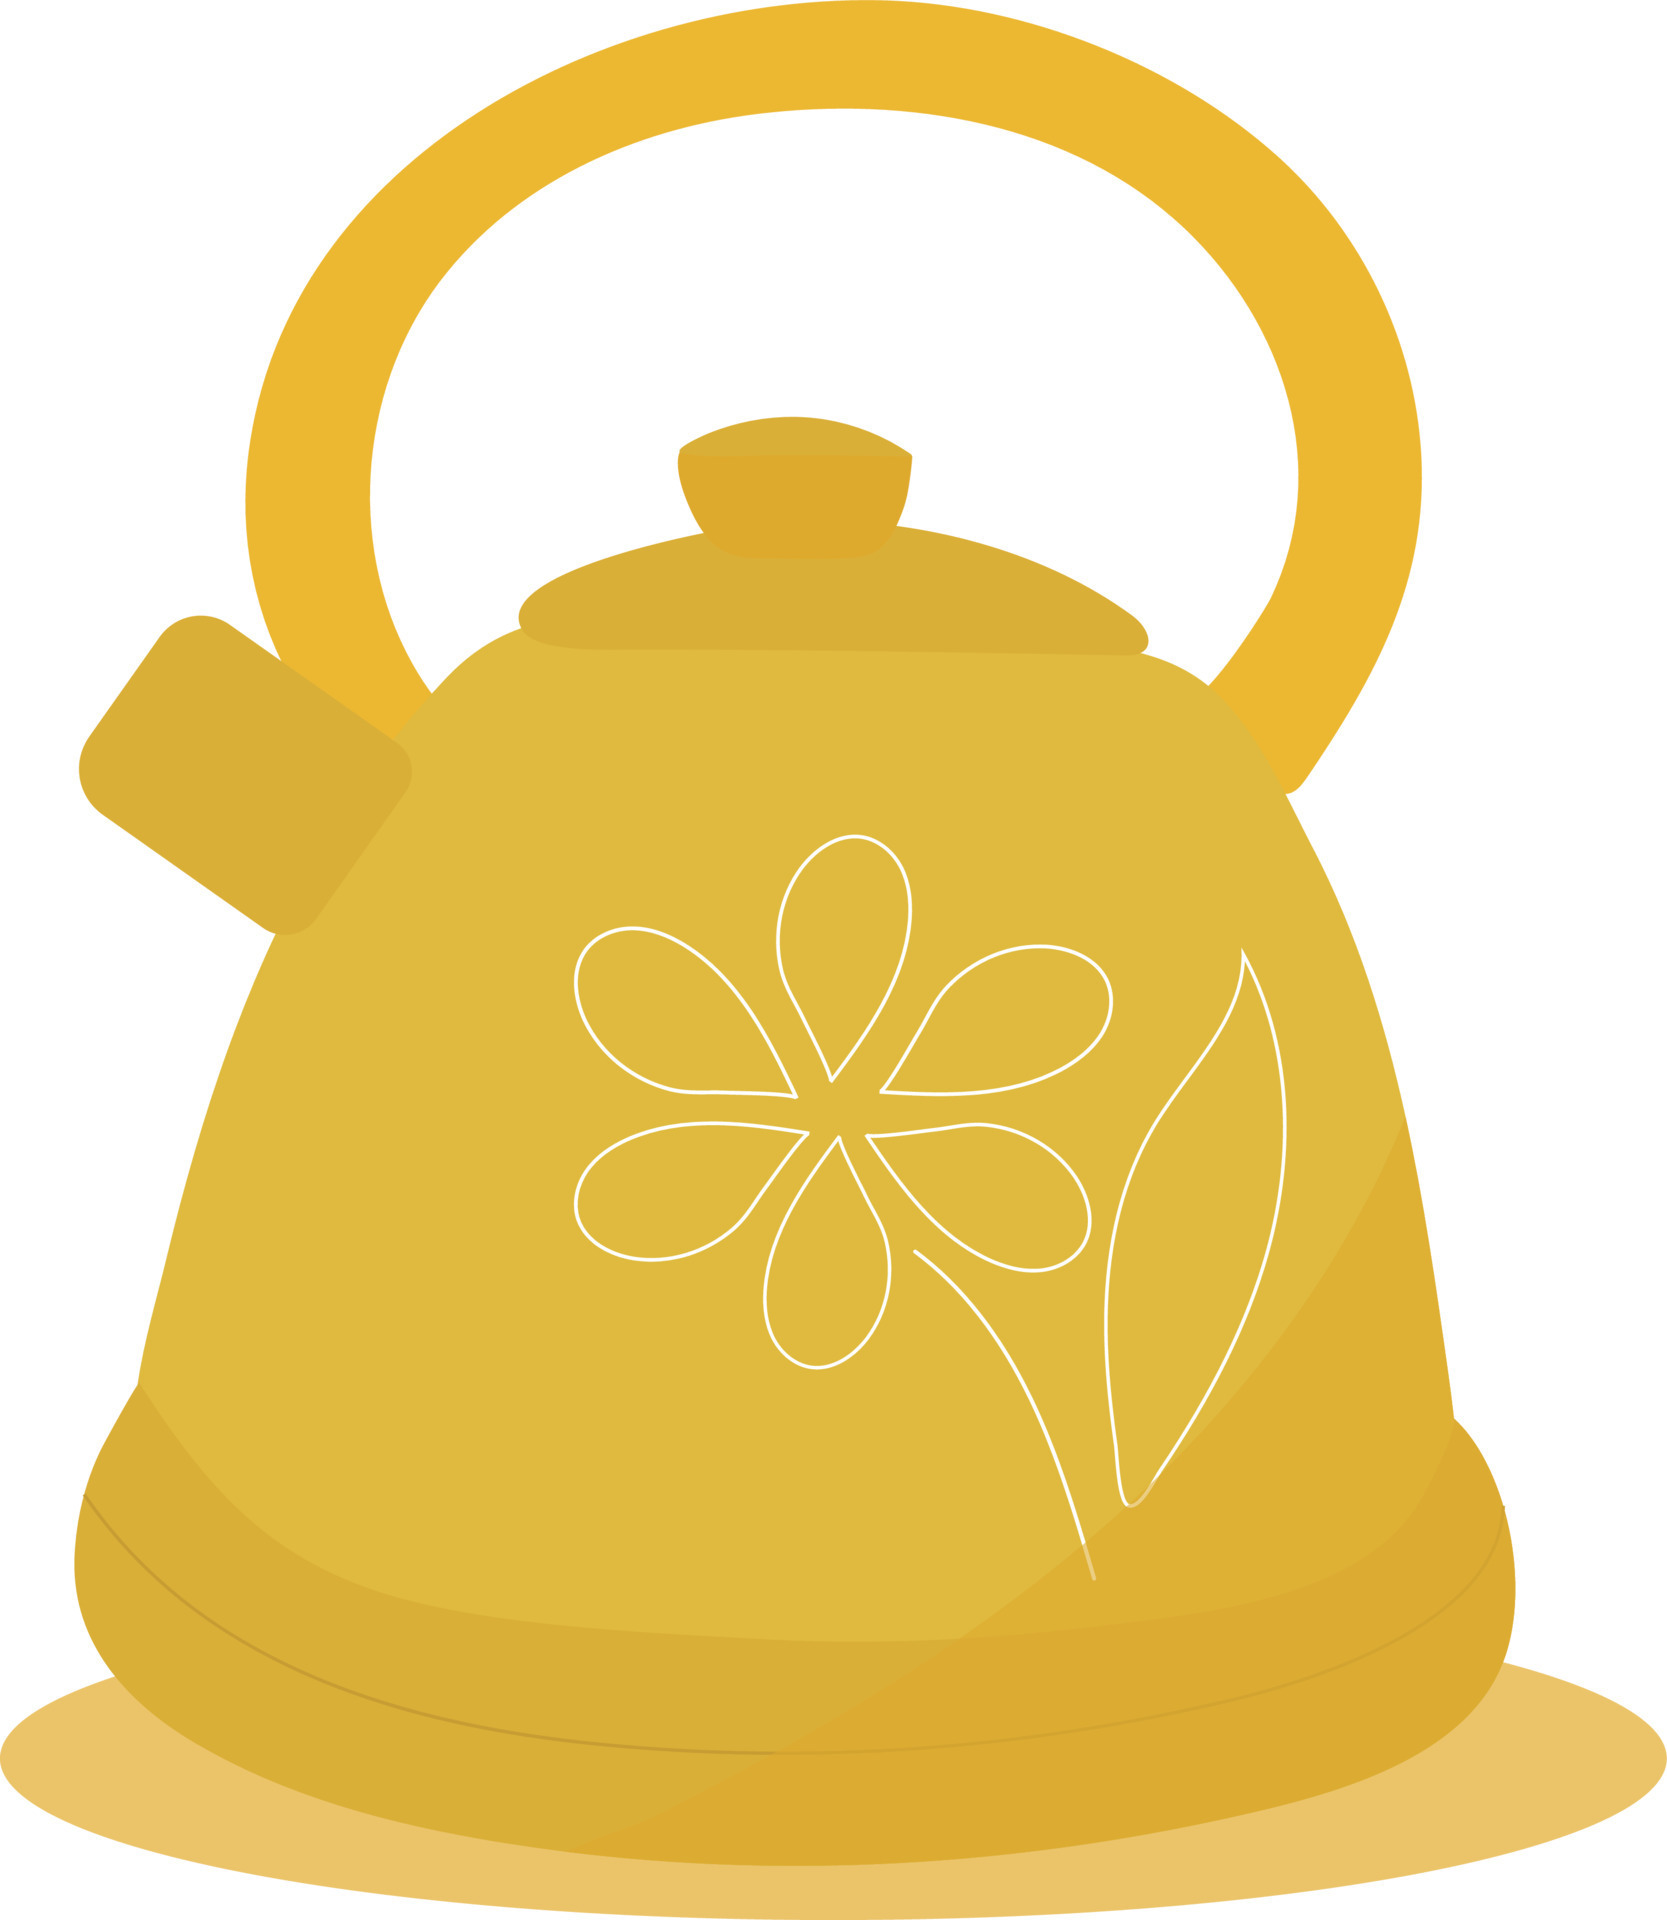 https://static.vecteezy.com/system/resources/previews/009/671/026/original/yellow-flower-teapot-separate-object-for-cafes-and-restaurants-tea-ceremony-flat-style-vector.jpg